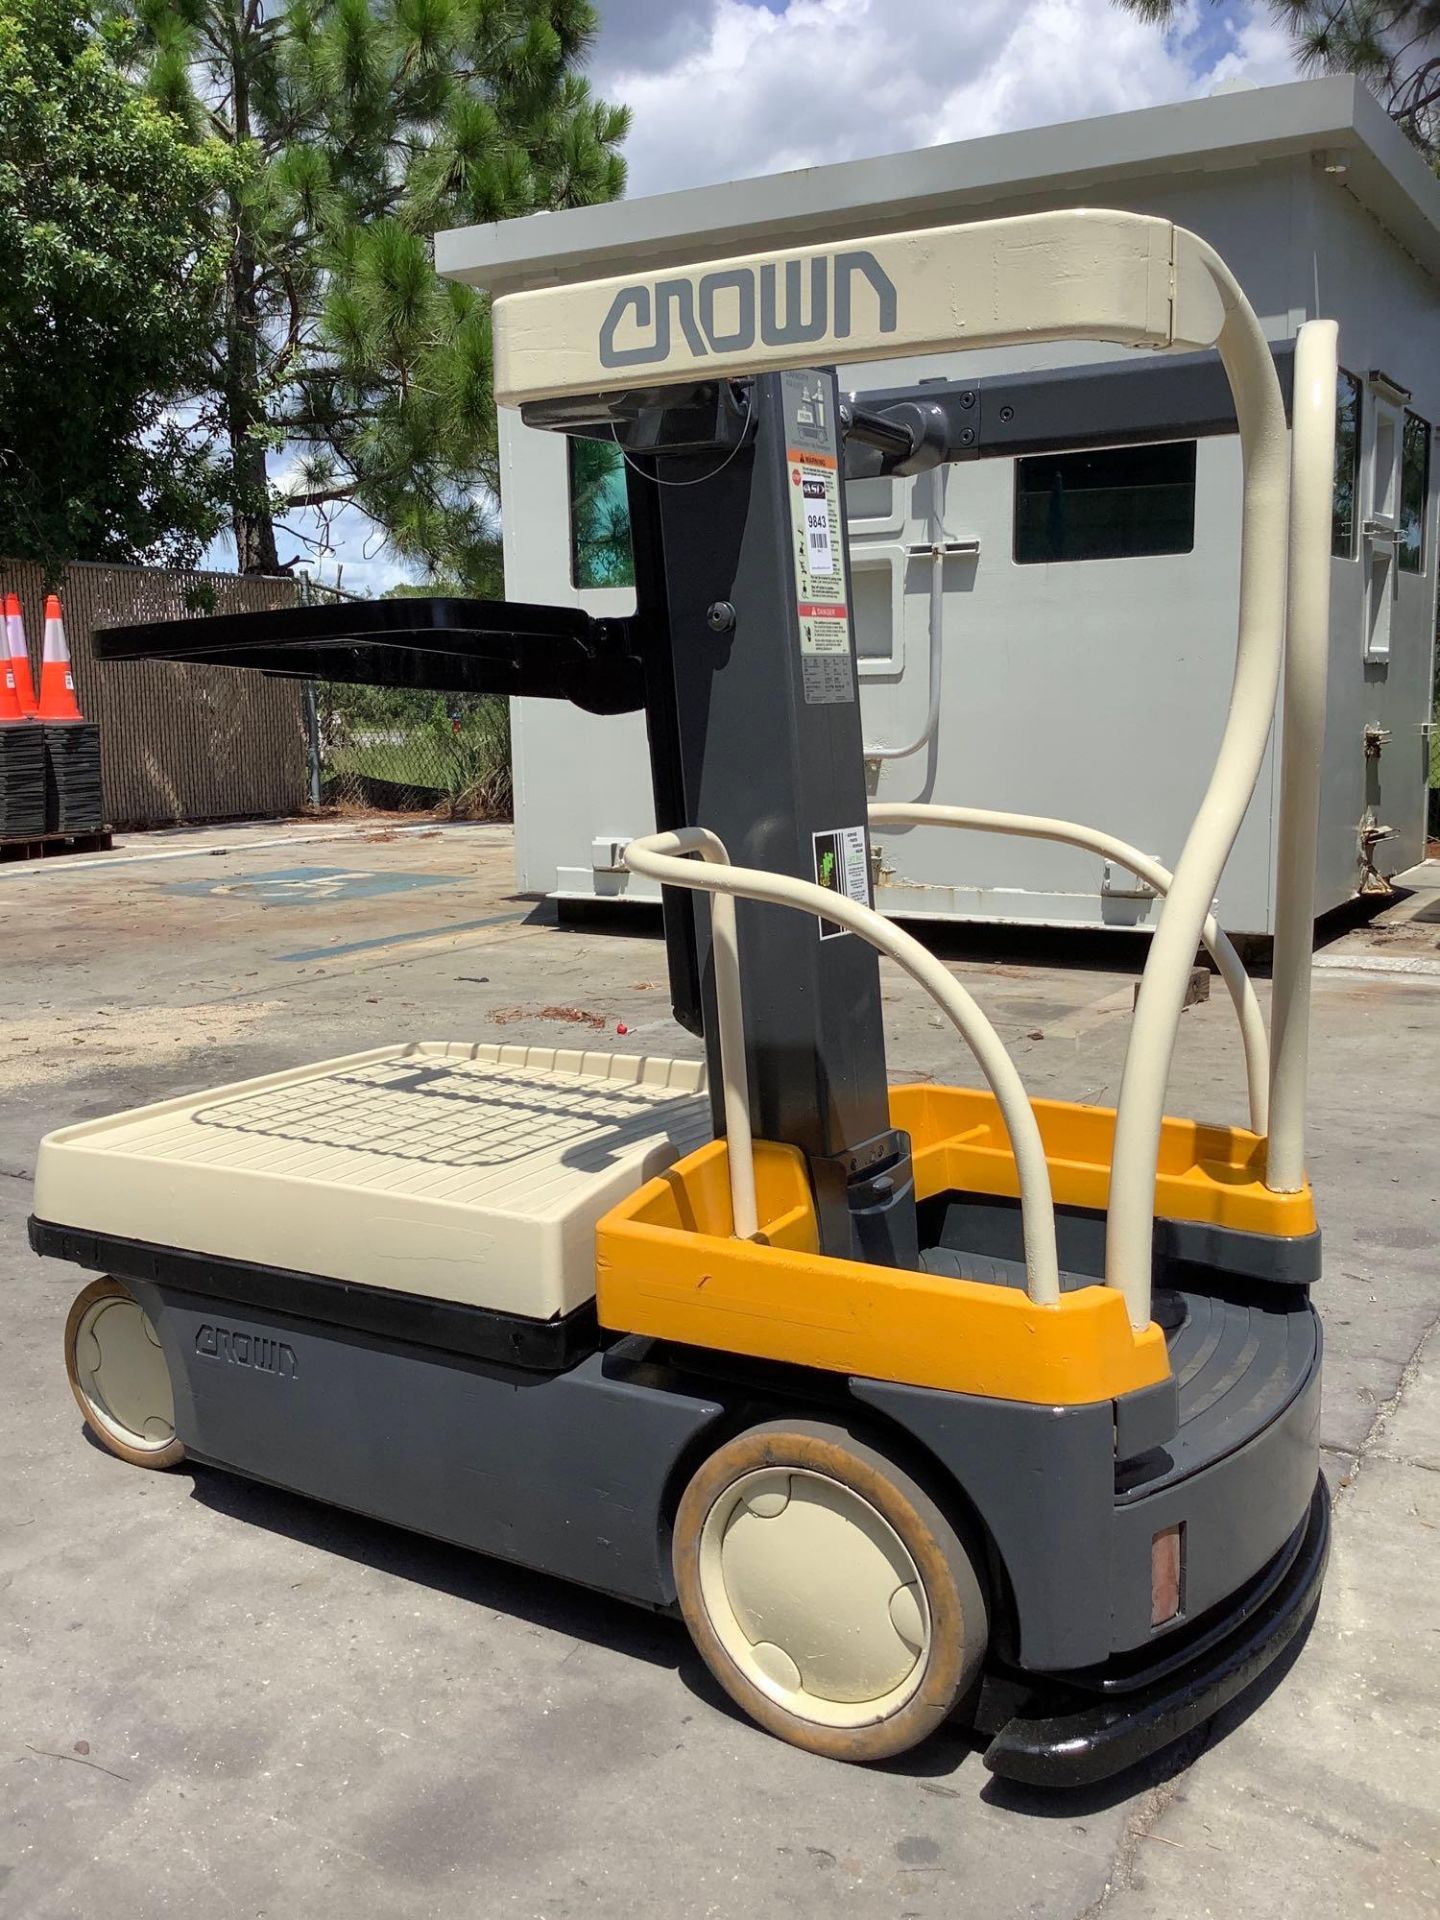 CROWN MODEL WAVE 50-84, ELECTRIC, 24 VOLTS, APPROX MAX PLATFORM LIFT HEIGHT 84in, RUNS AND OPERATES